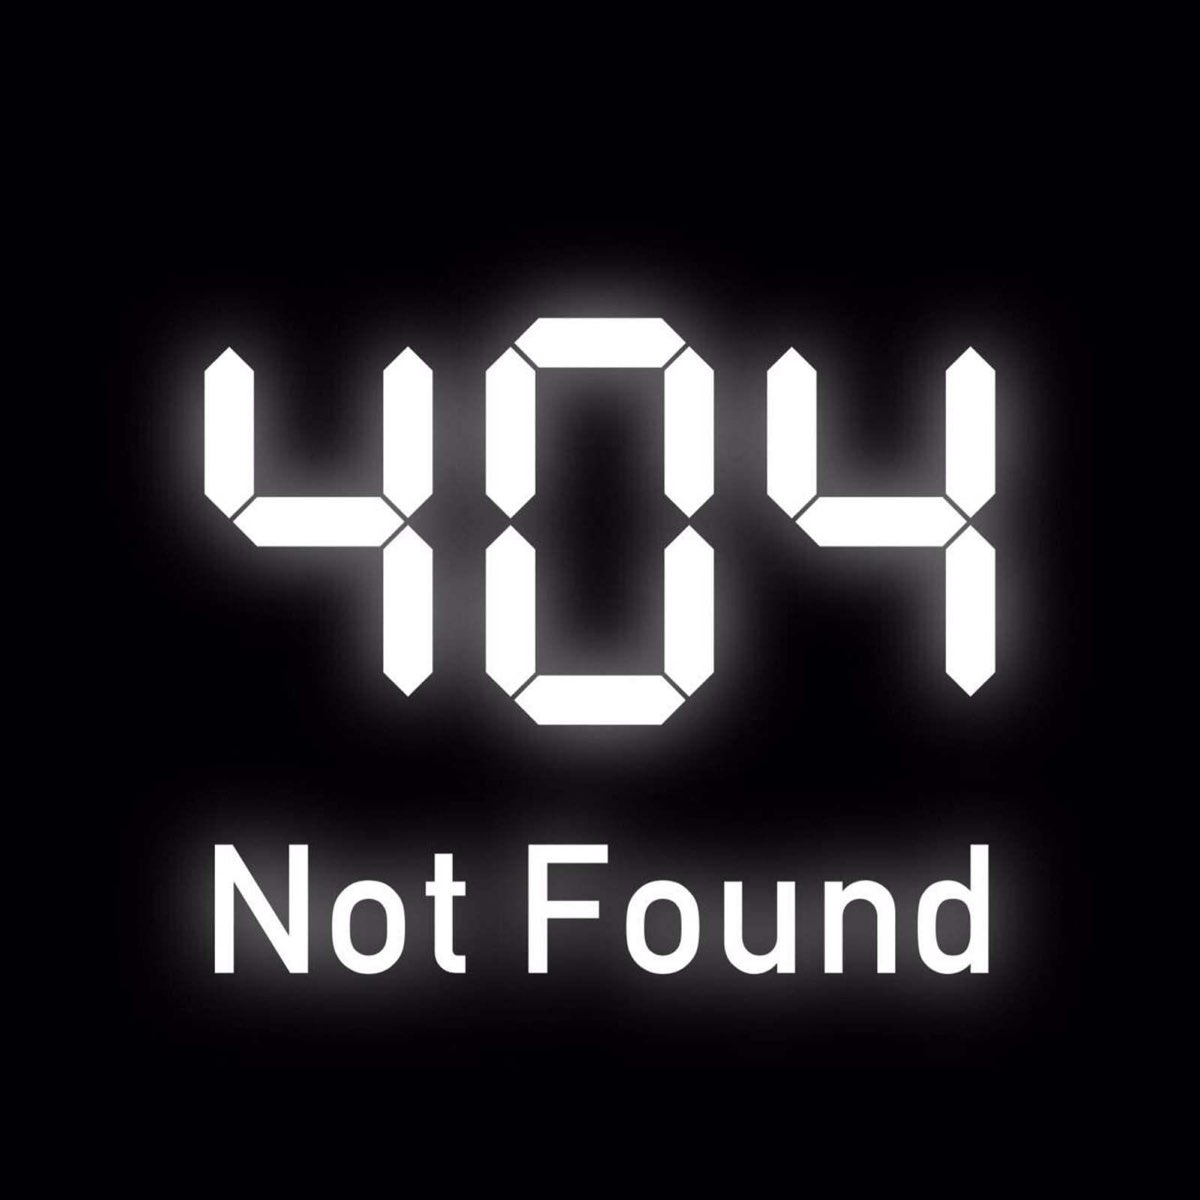 Product not found. Not found. Error 404 not found. 404 Нот фаунд. Картинка not found.